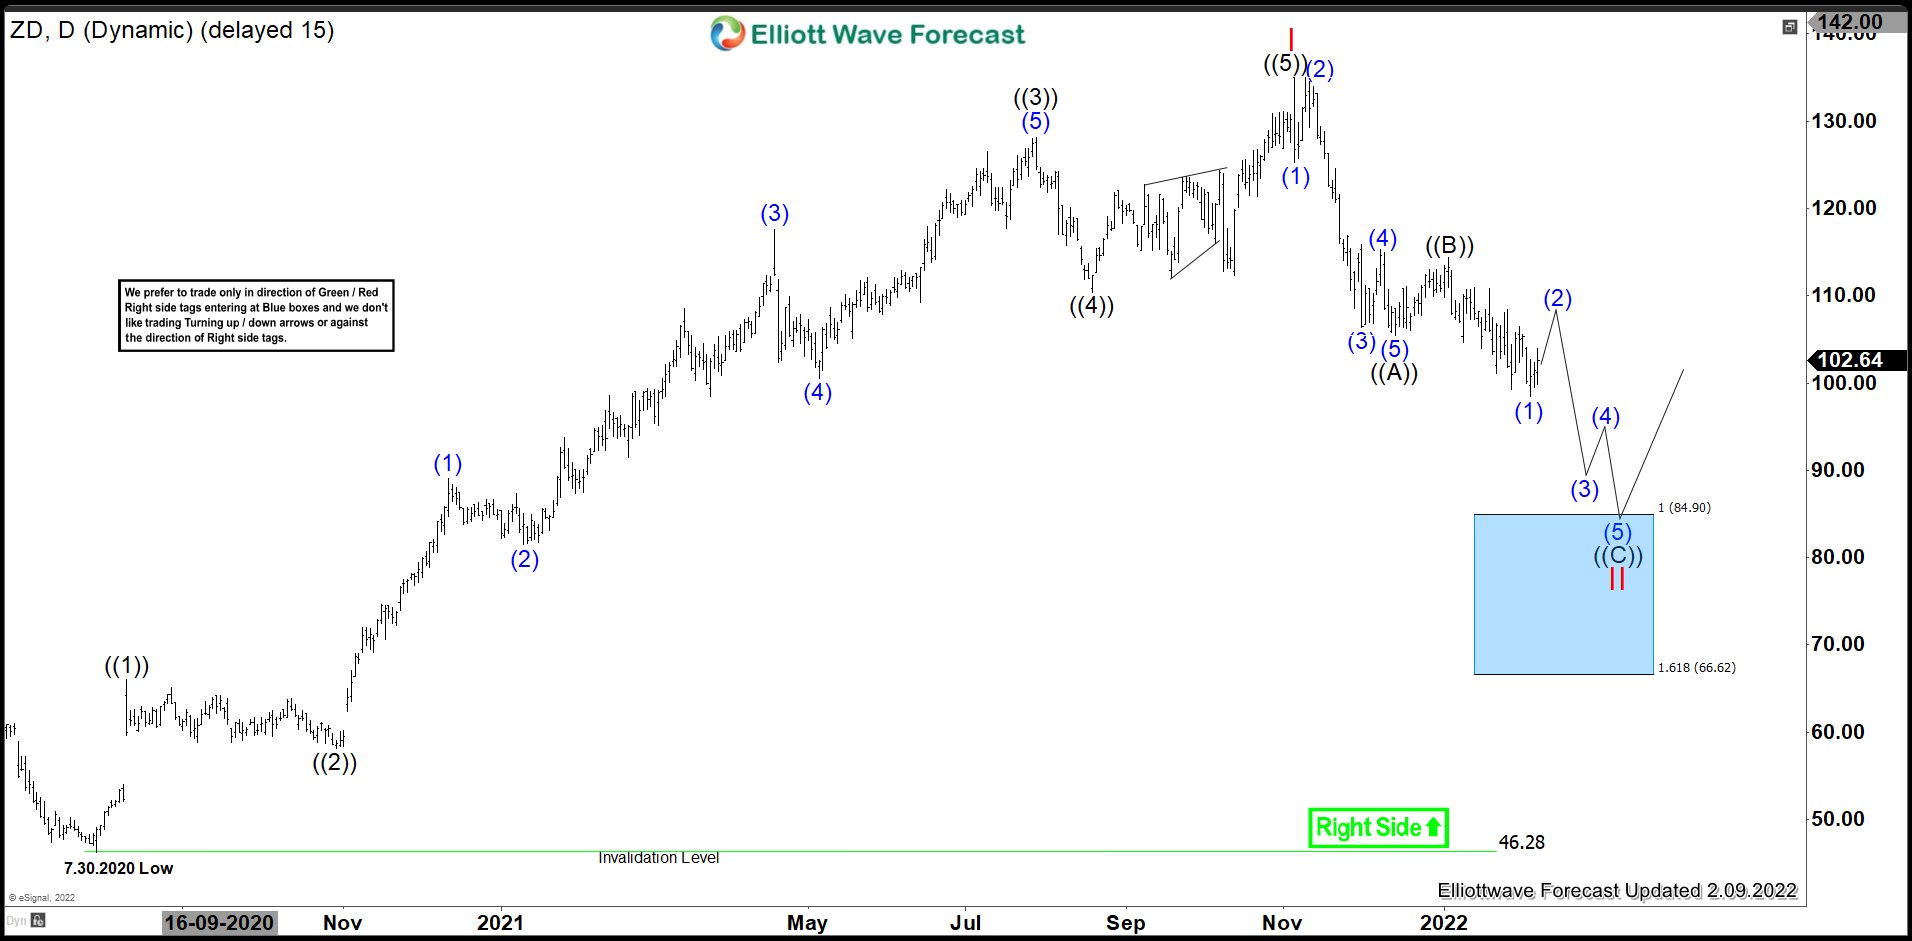 Elliott Wave View: ZD Expect To Pulling Back in II